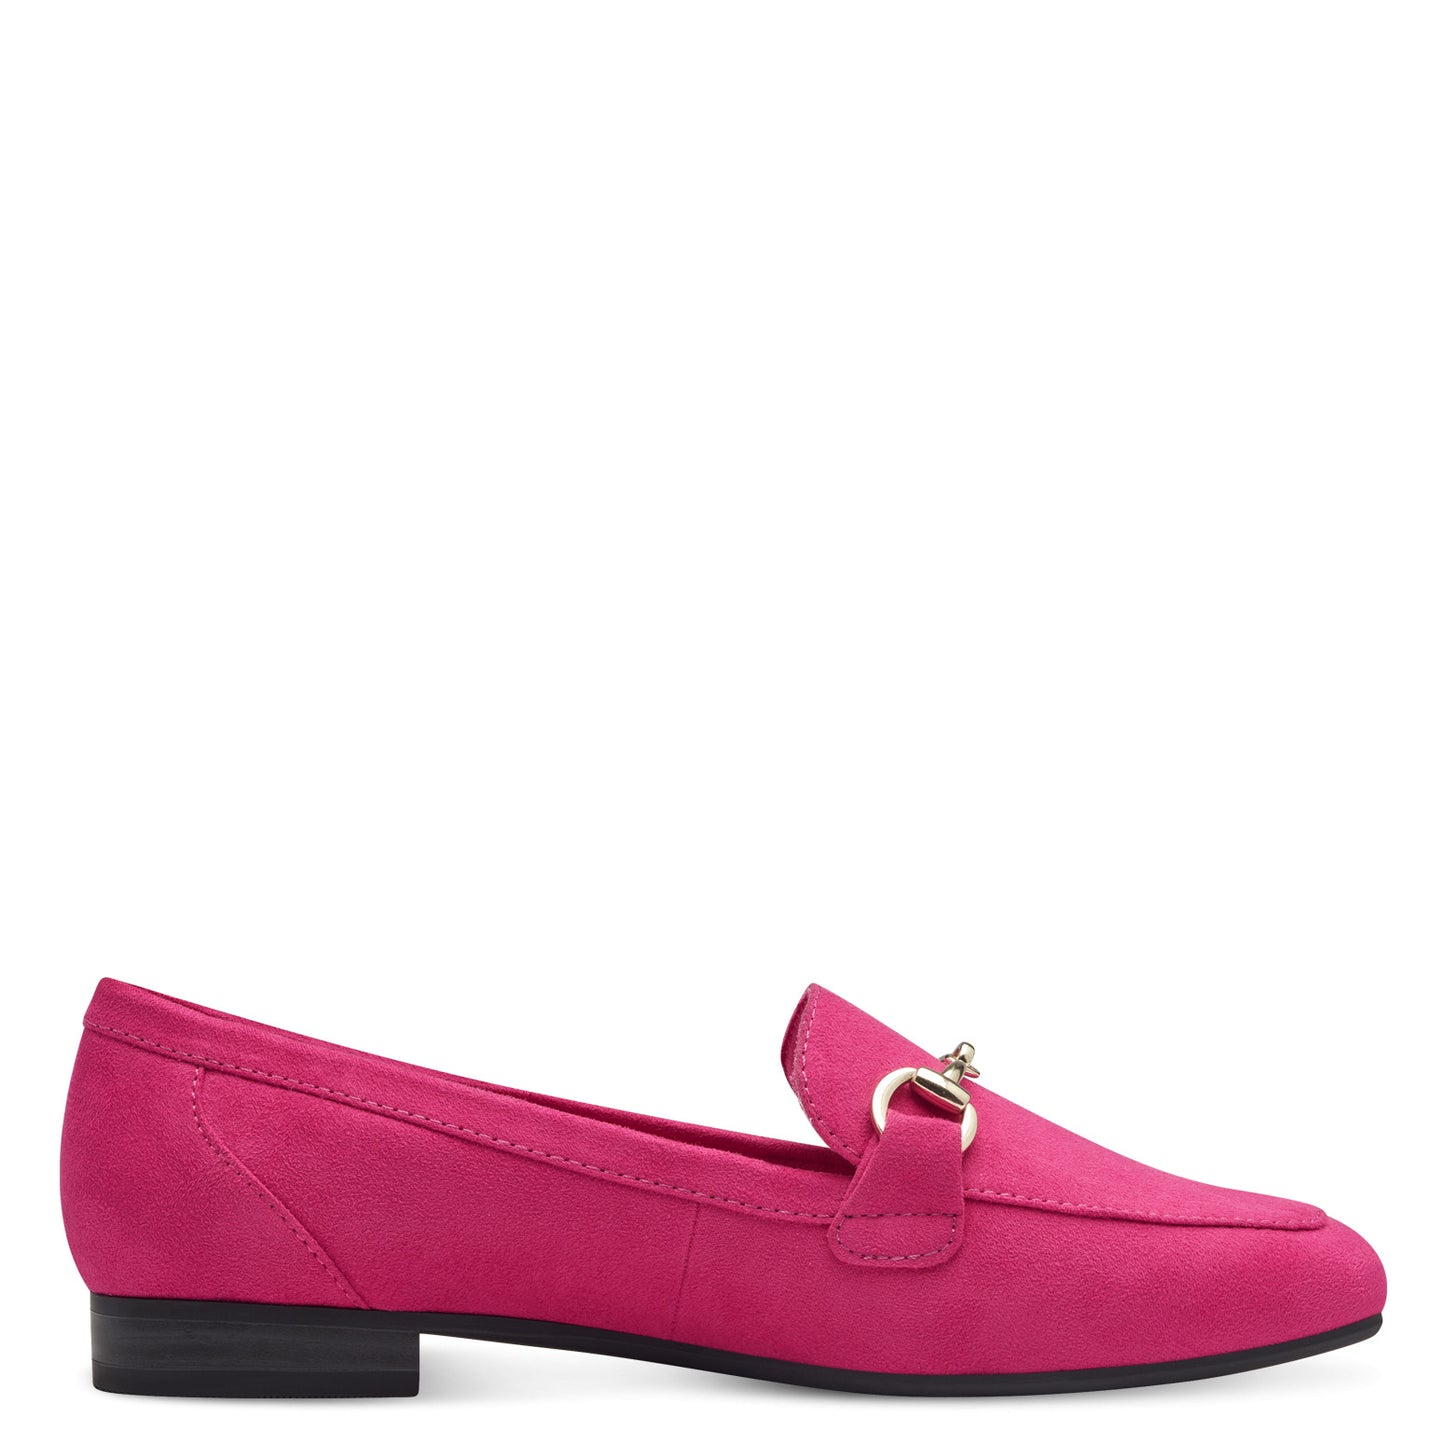 Marco Tozzi - Ladies Shoes Loafers Pink (2225)